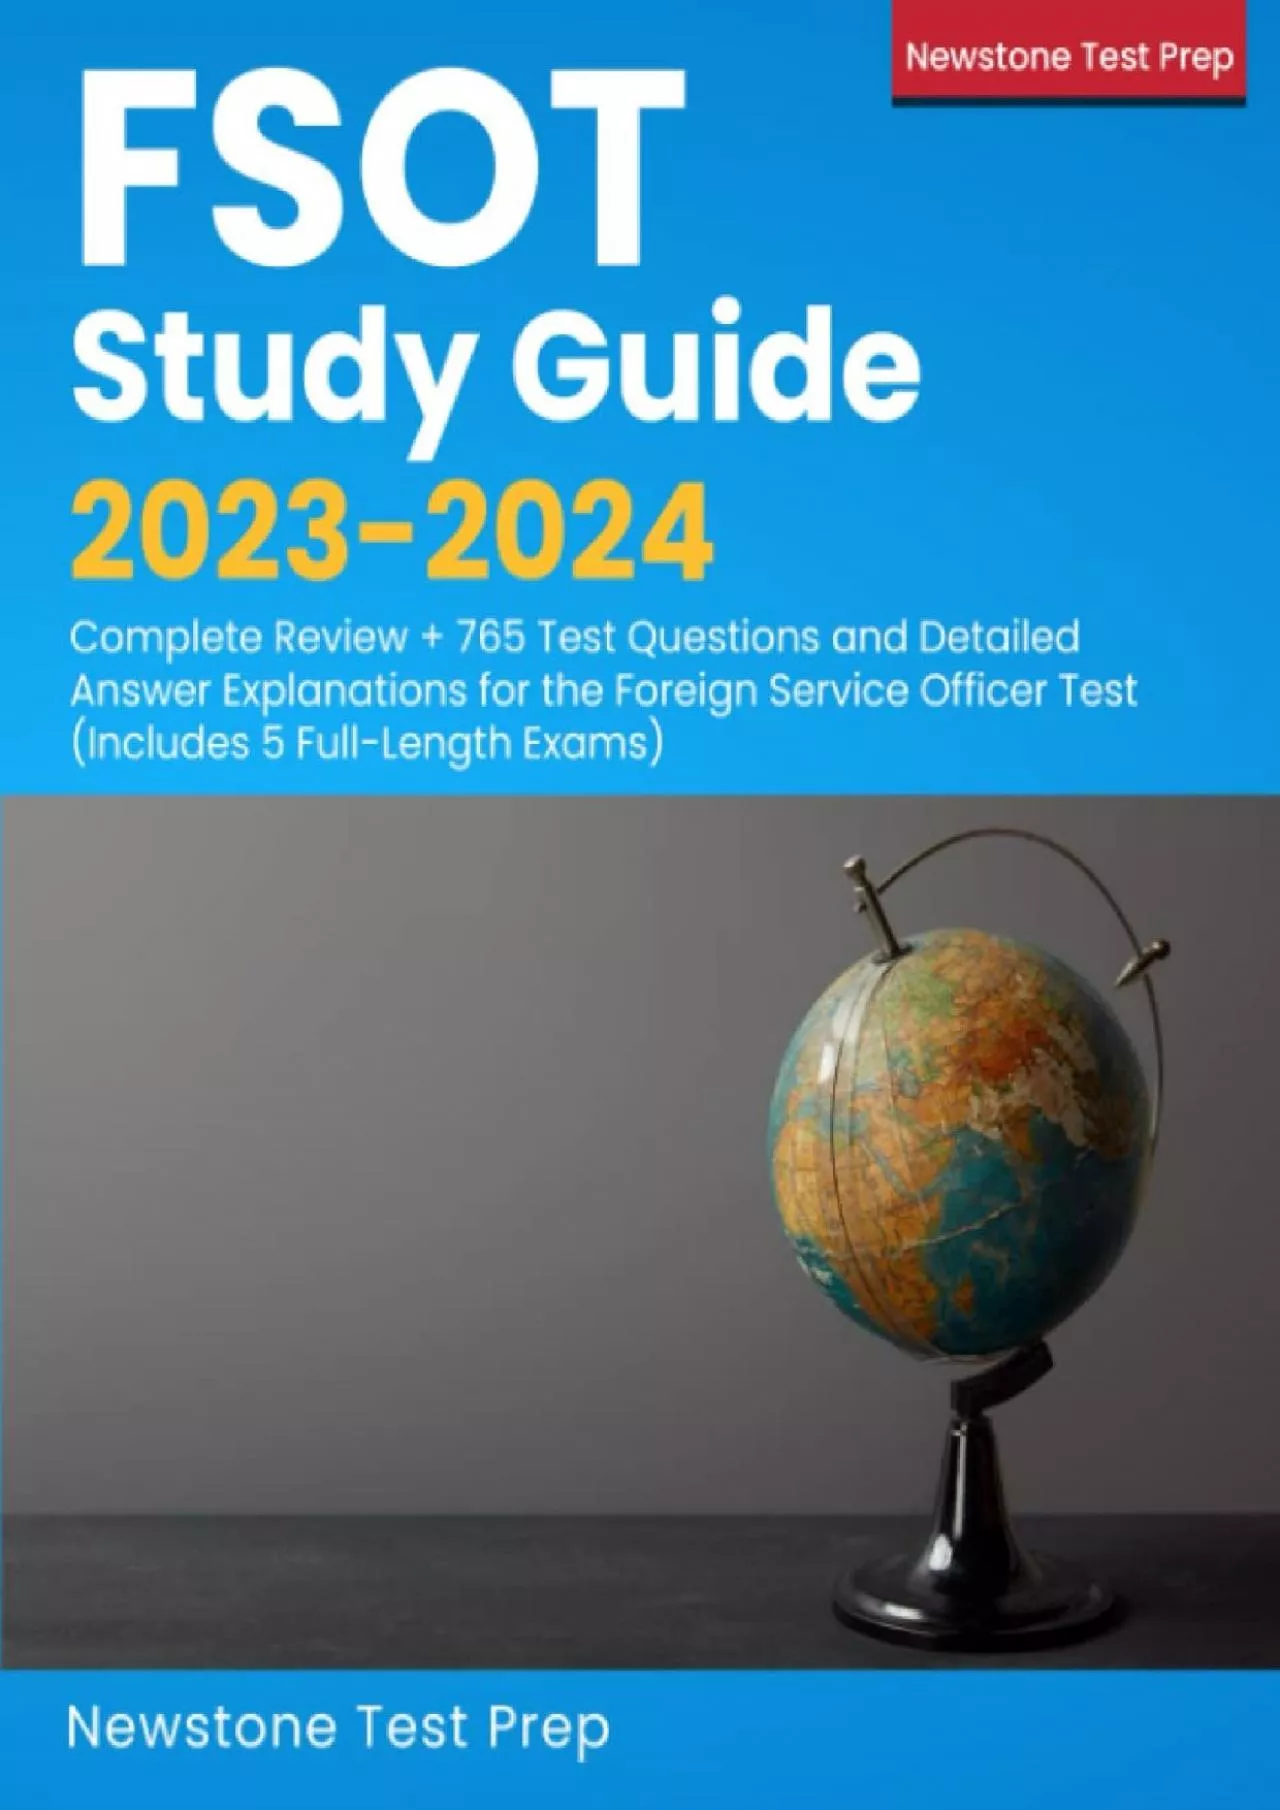 [READ] FSOT Study Guide 2023-2024: Complete Review + 765 Test Questions and Detailed Answer